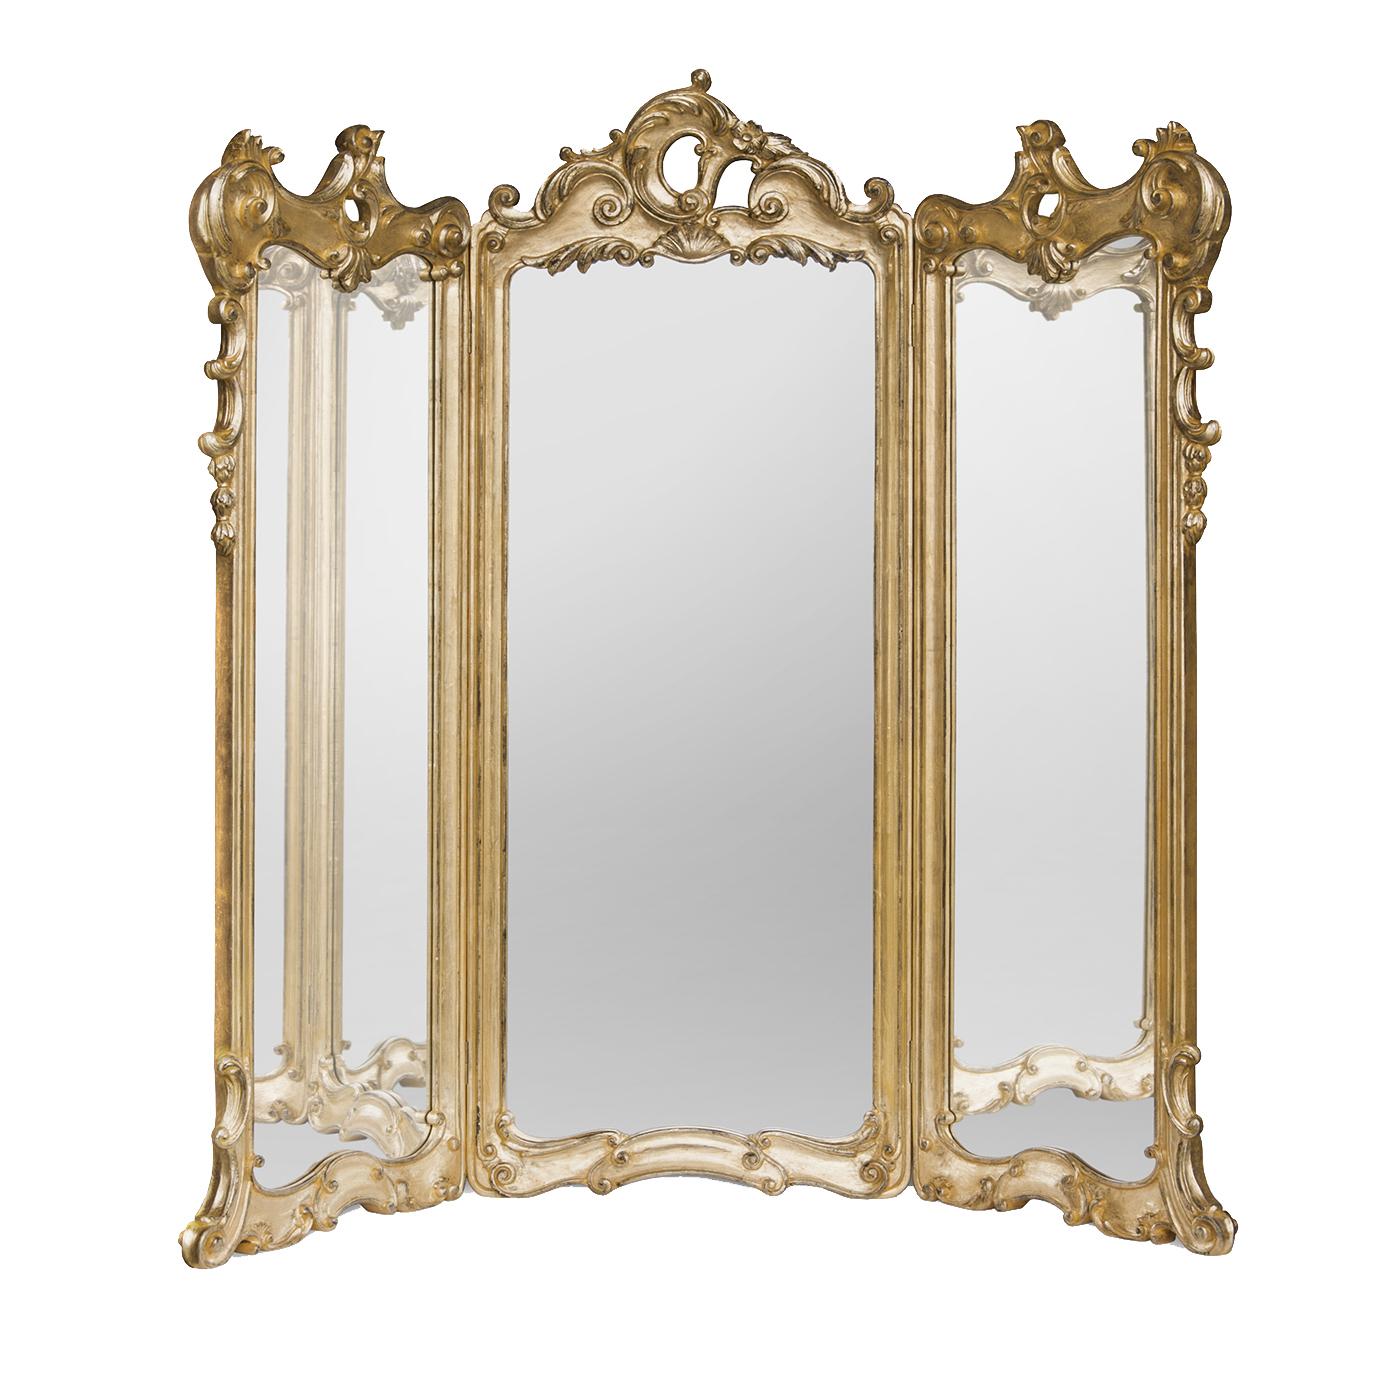 Majestic in its size and scope, this sophisticated mirror in three parts boasts a hand carved wooden frame that was coated with precious gold leaf and finished with an elegant aged patina. This stunning piece can also double as screen, since the two